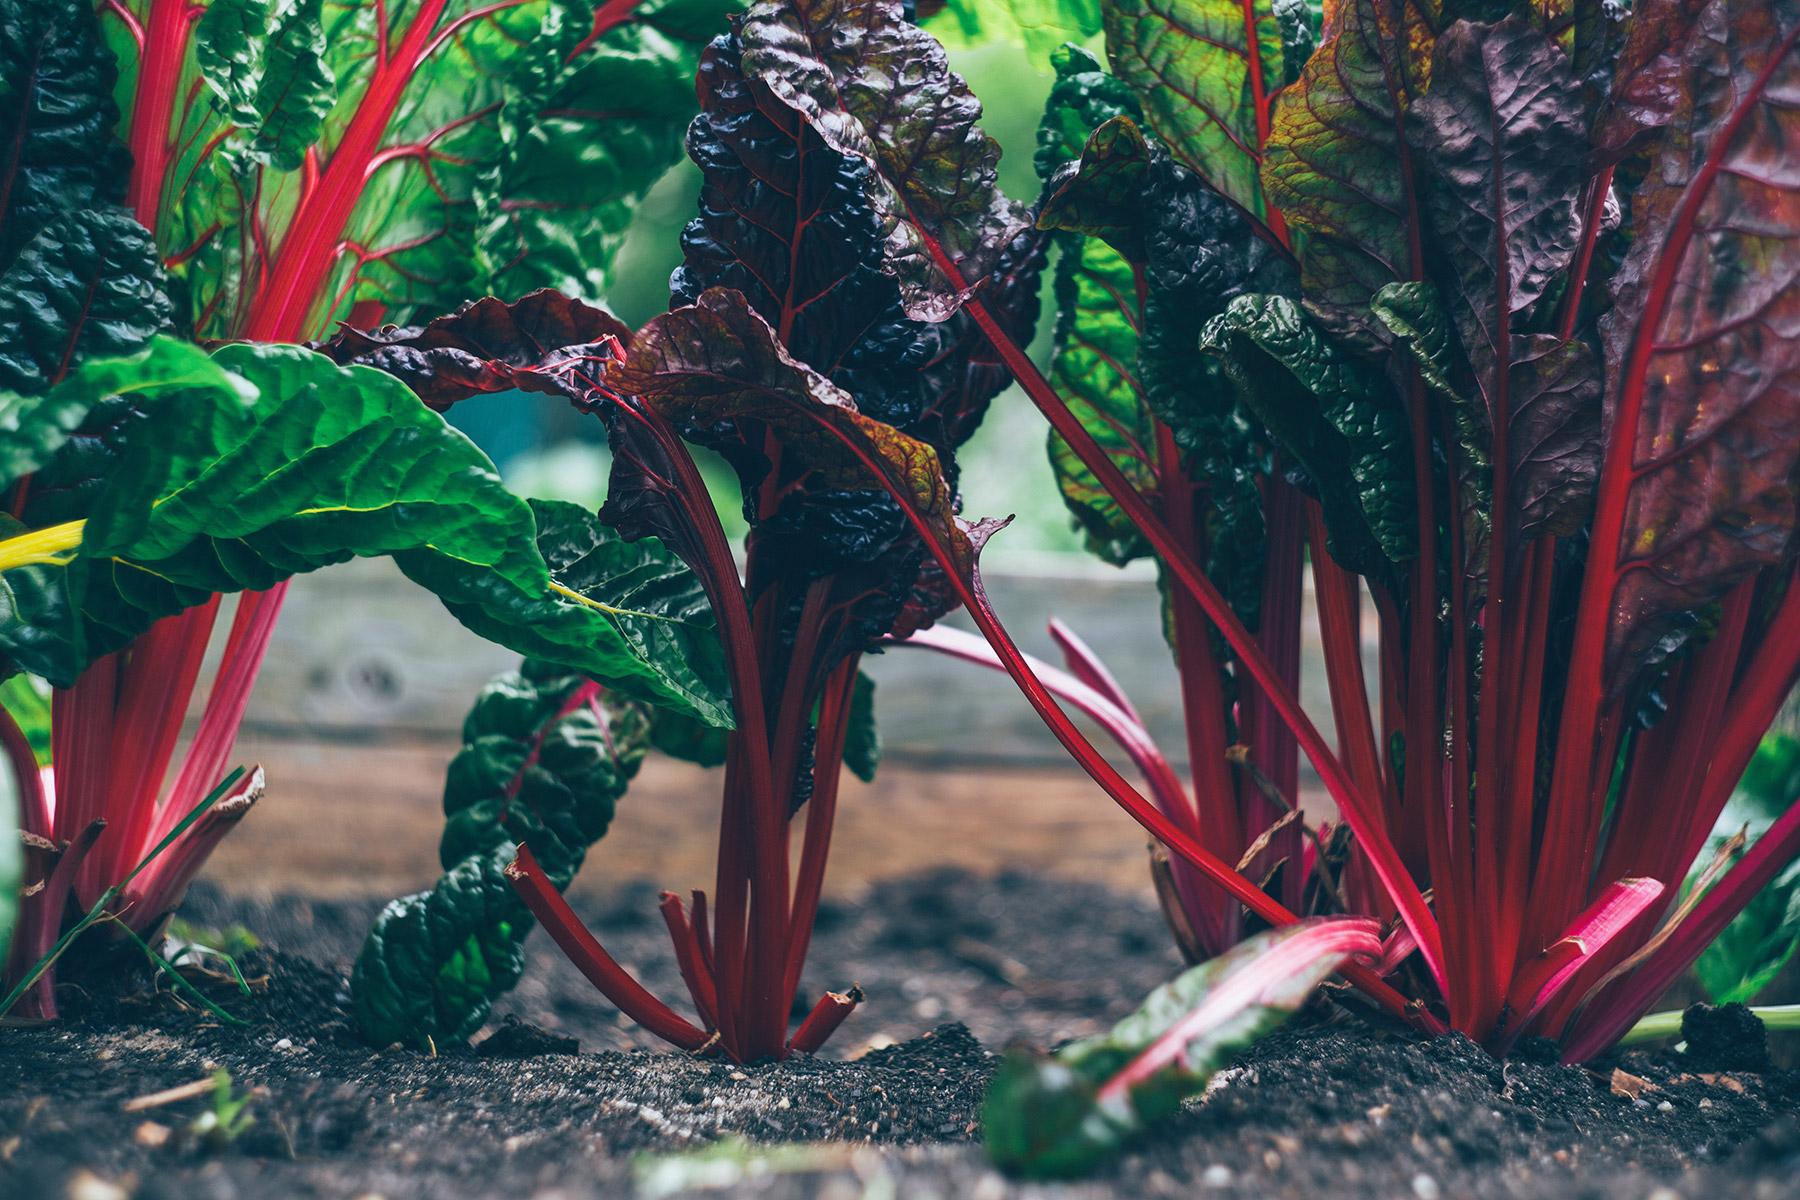 Chard is one of the vegetables grown in the community gardens established during the youth climate project of the Evangelical Lutheran Church in Chile (IELCH). Photo: Markus Spiske via Unsplash